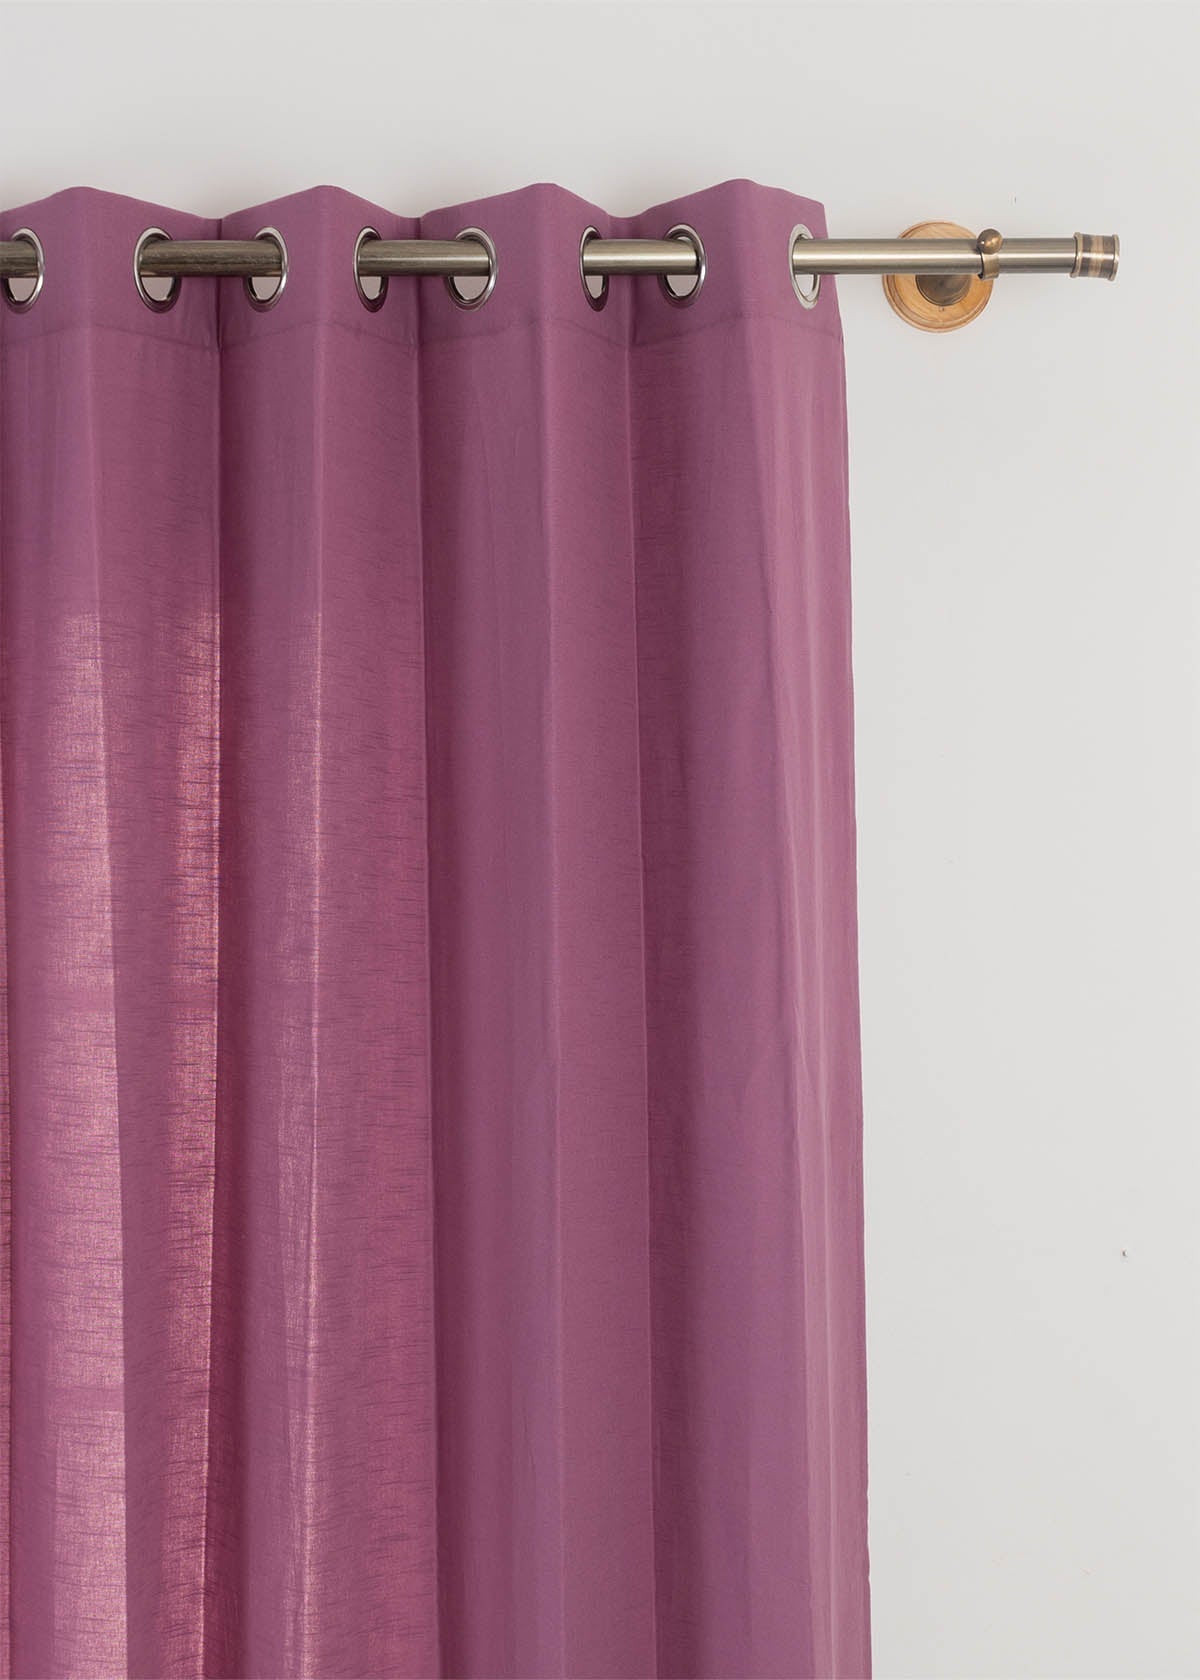 Solid Grape 100% cotton plain curtain for bedroom - Room darkening - Pack of 1